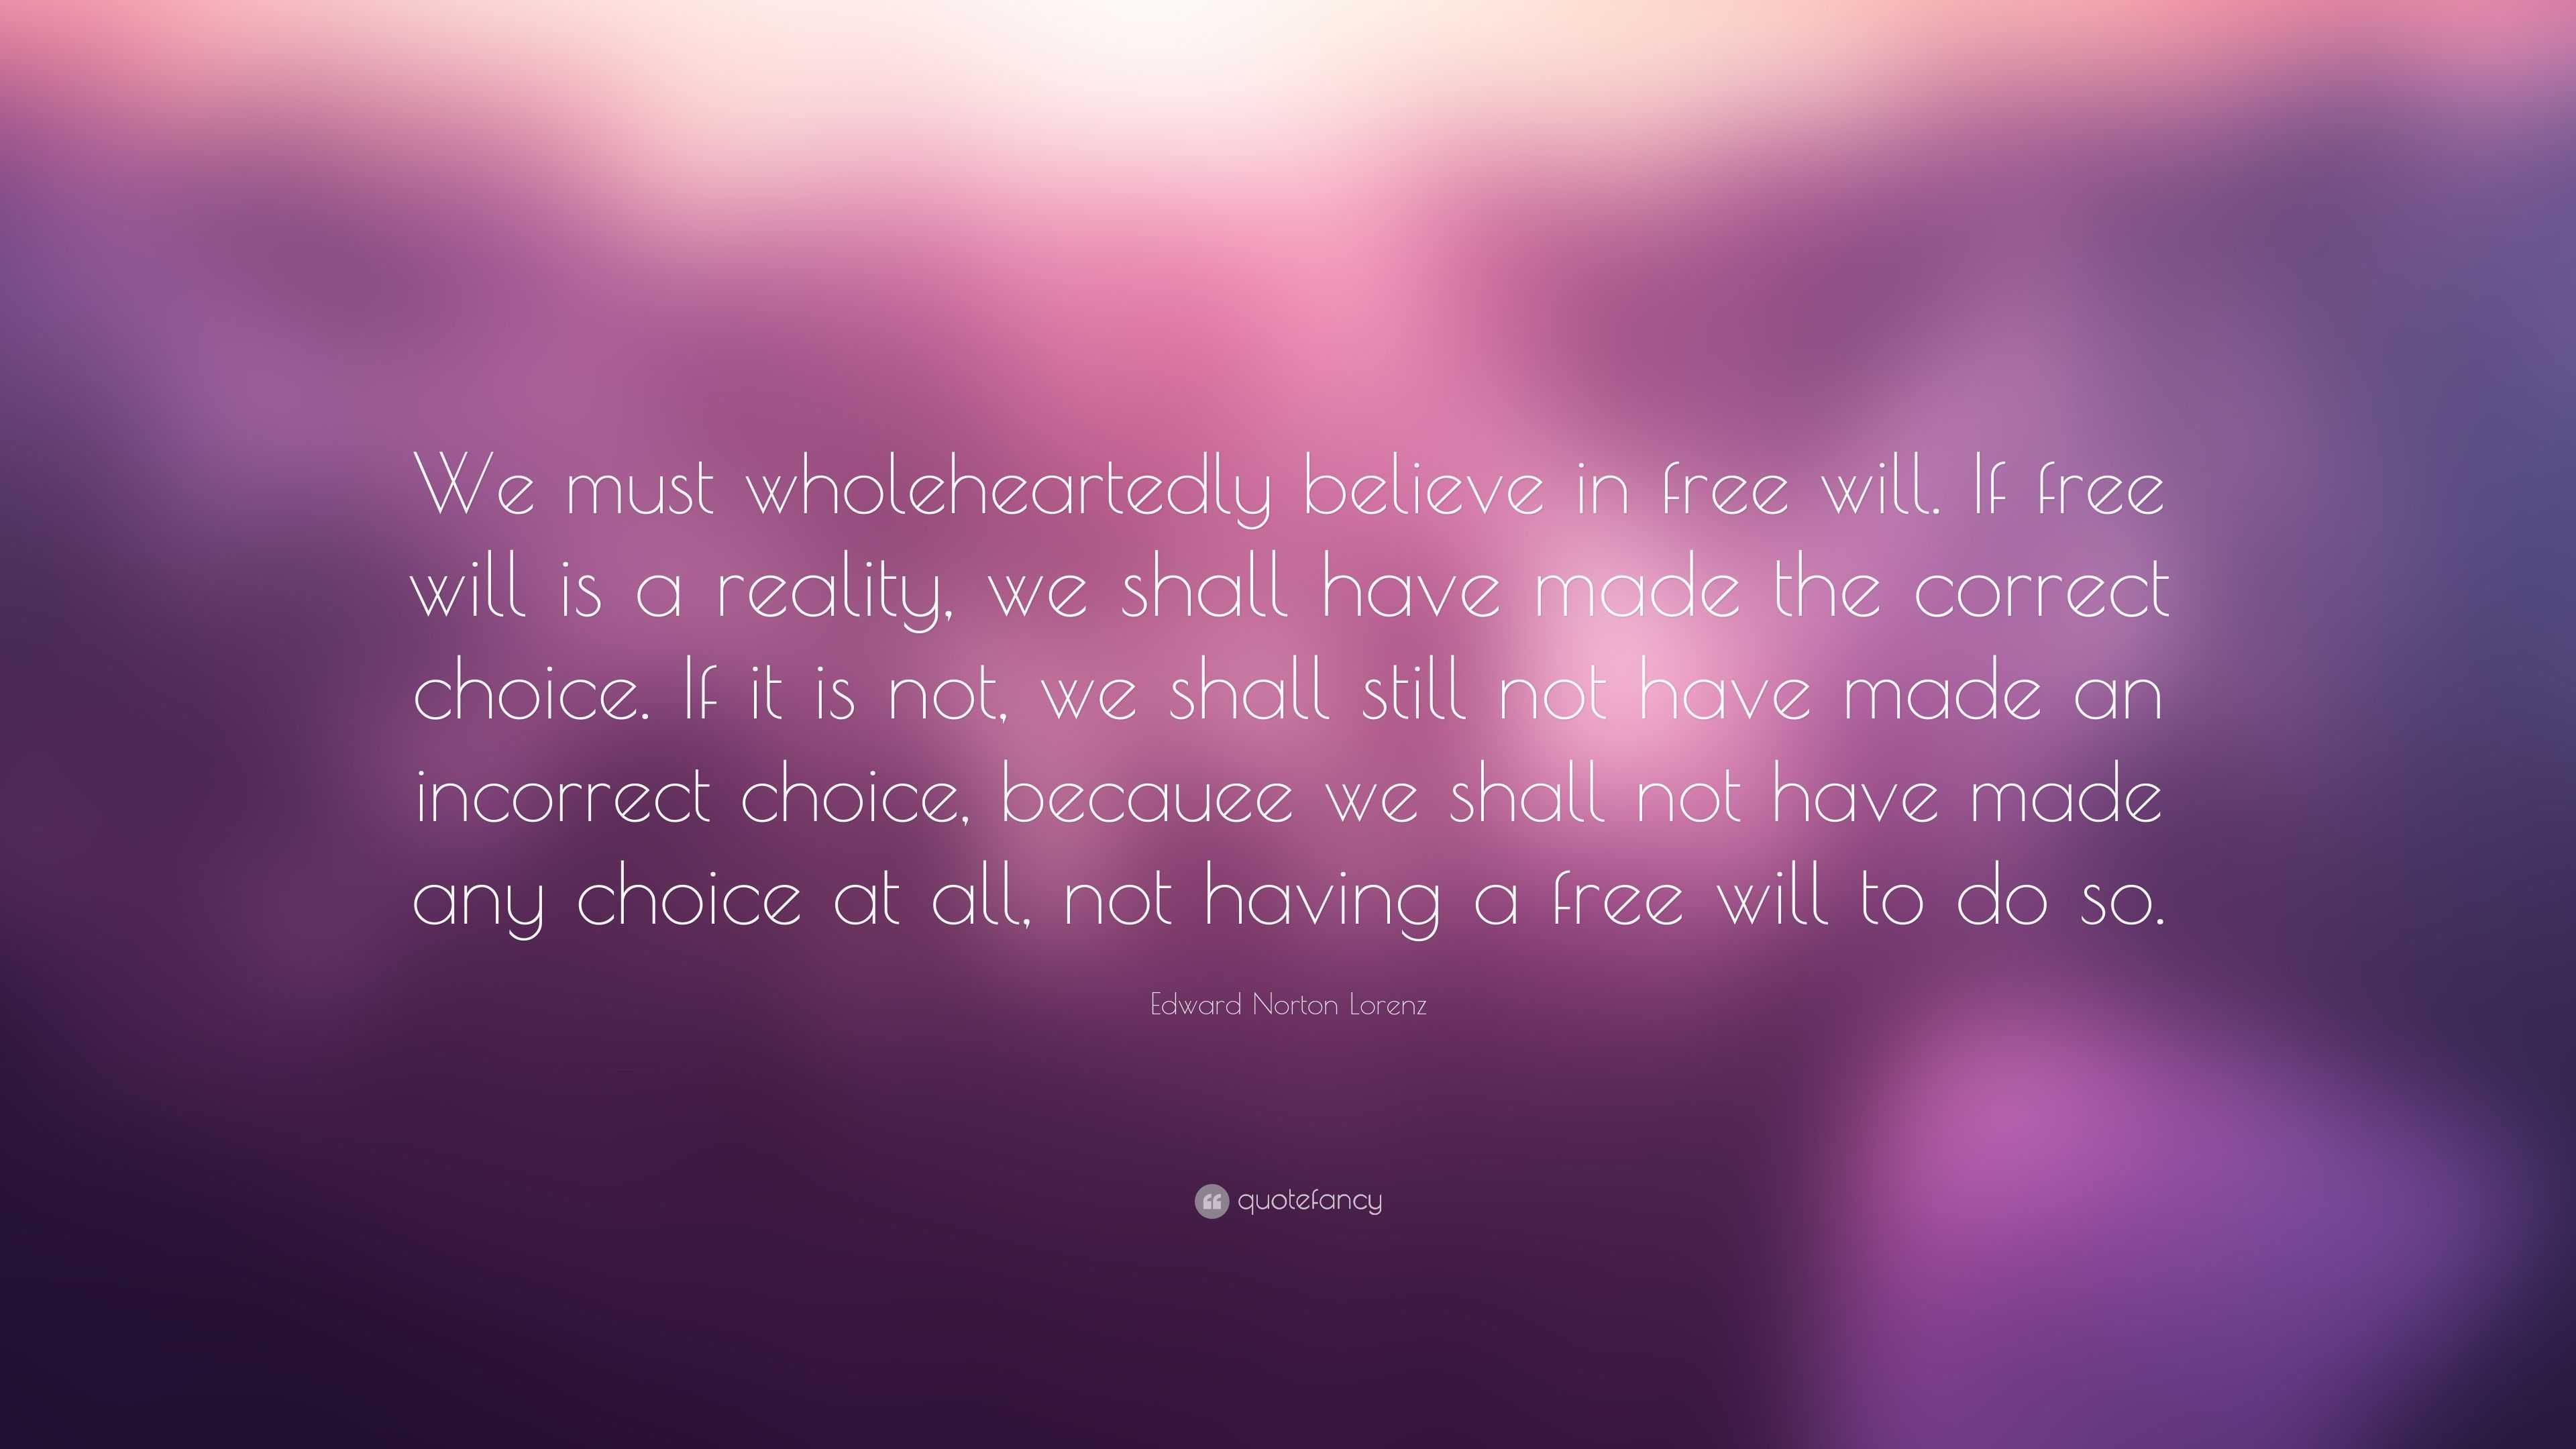 Edward Norton Lorenz Quote: “We must wholeheartedly believe in free ...